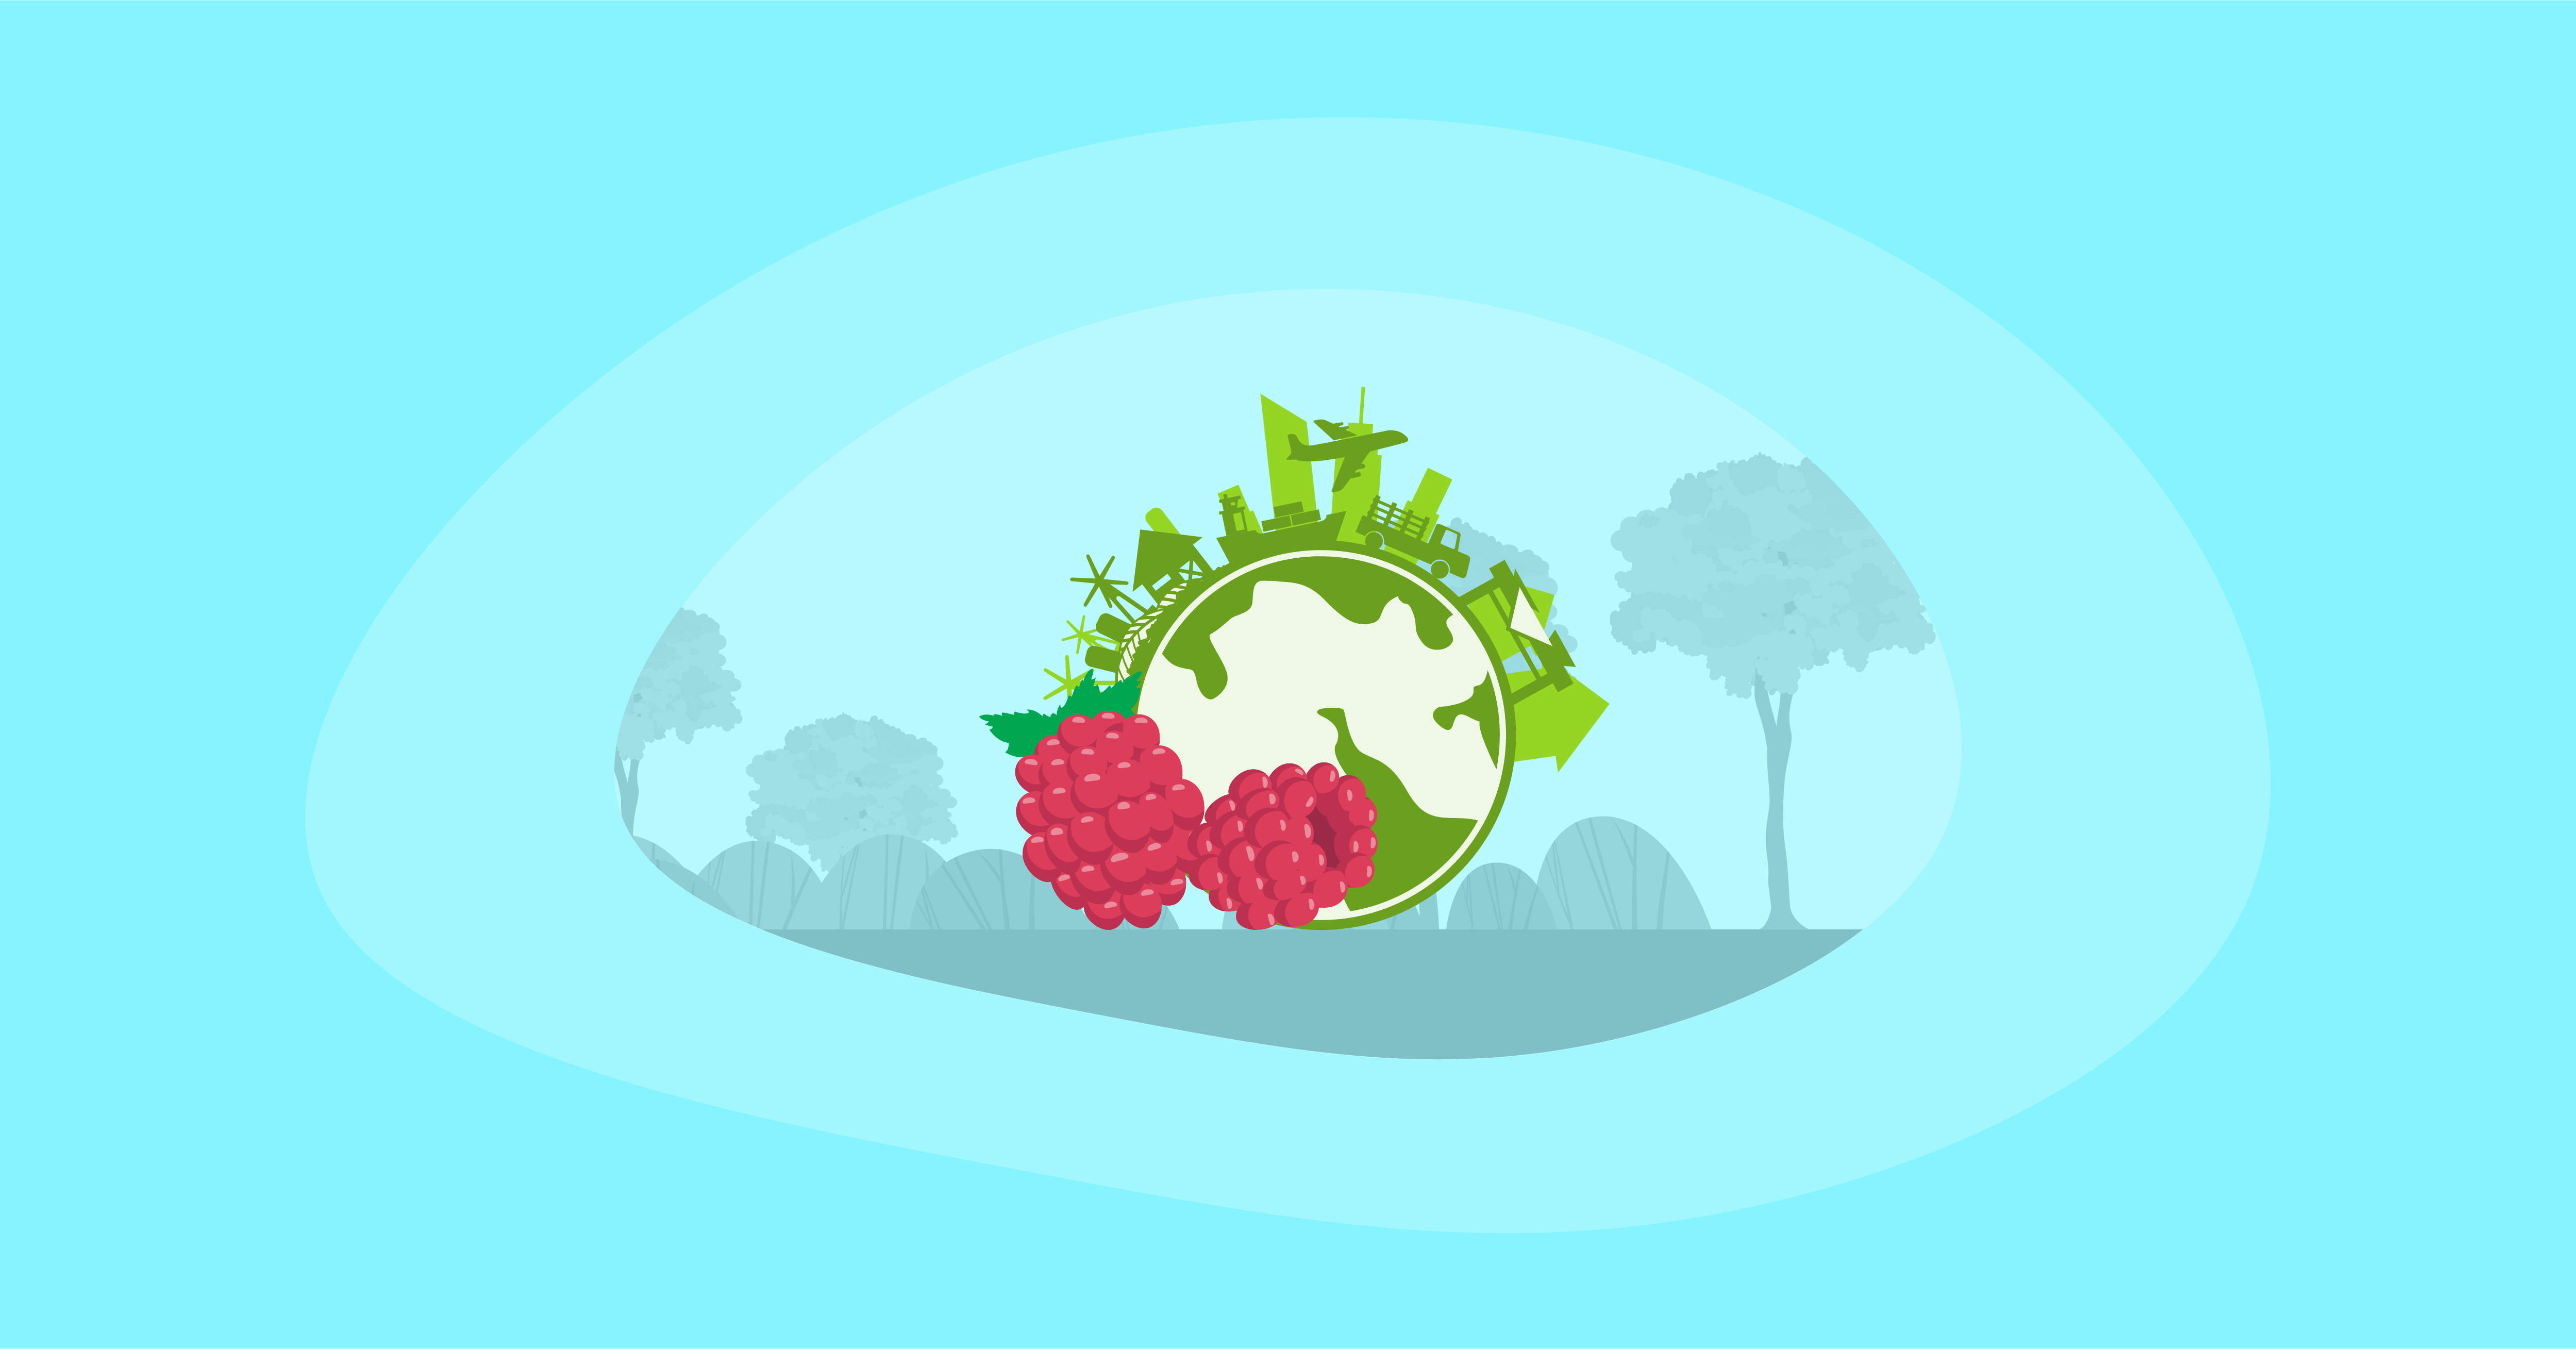 Illustration of raspberries and their environmental impact